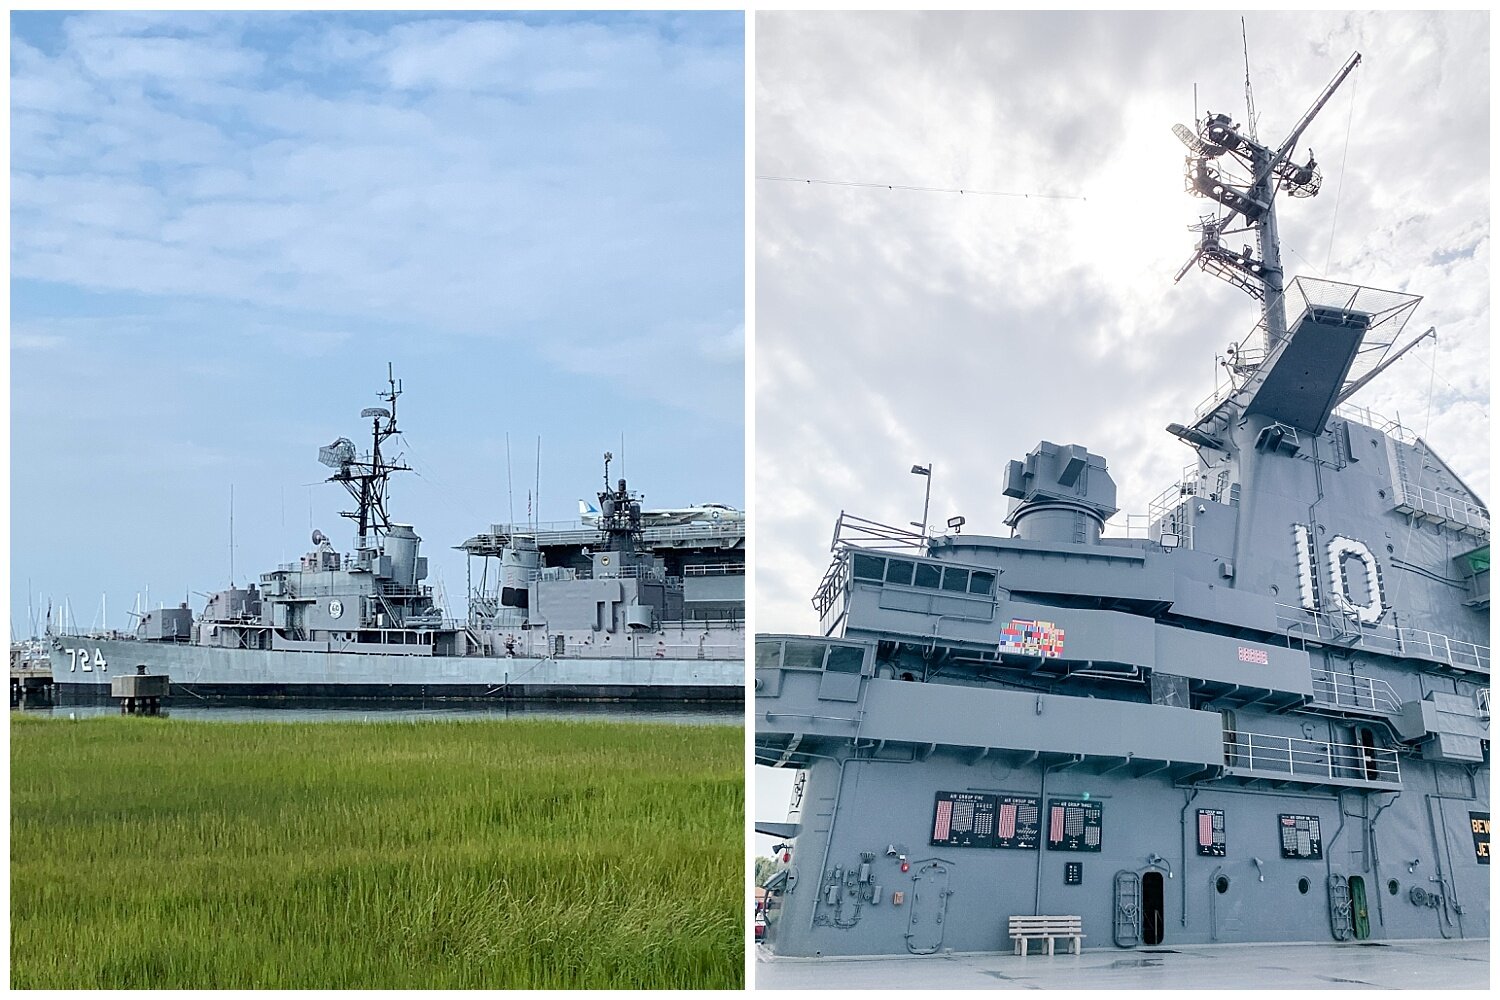 pictures of the USS Yorktown in Charleston, South Carolina